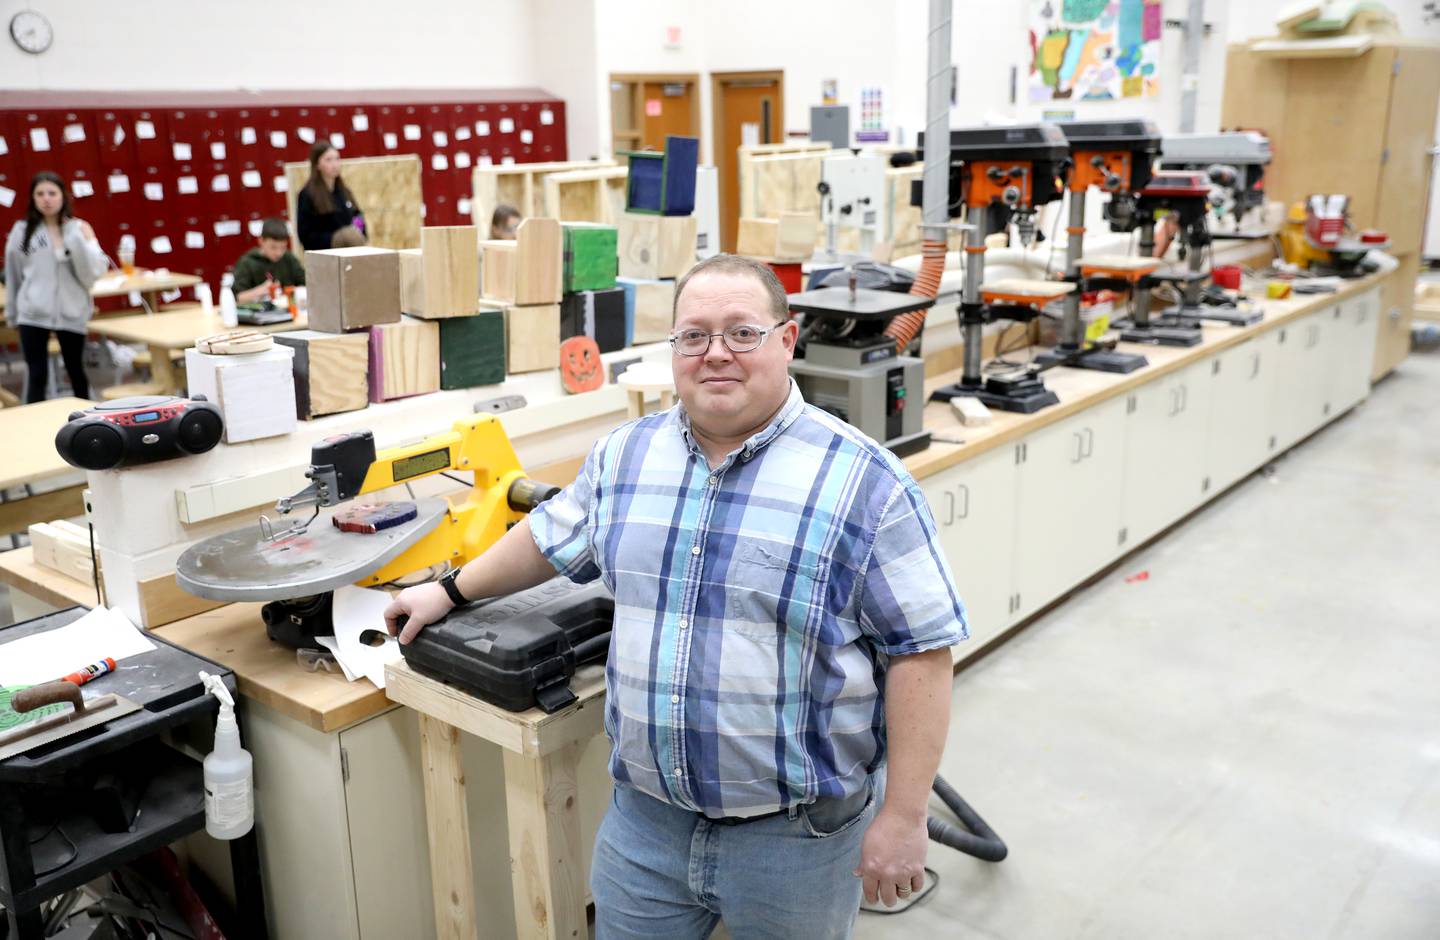 Kaneland Harter Middle School industrial arts teacher Michael Livorsi was recently nominated for an Educator of the Year award from the Kane County Regional Office of Education.